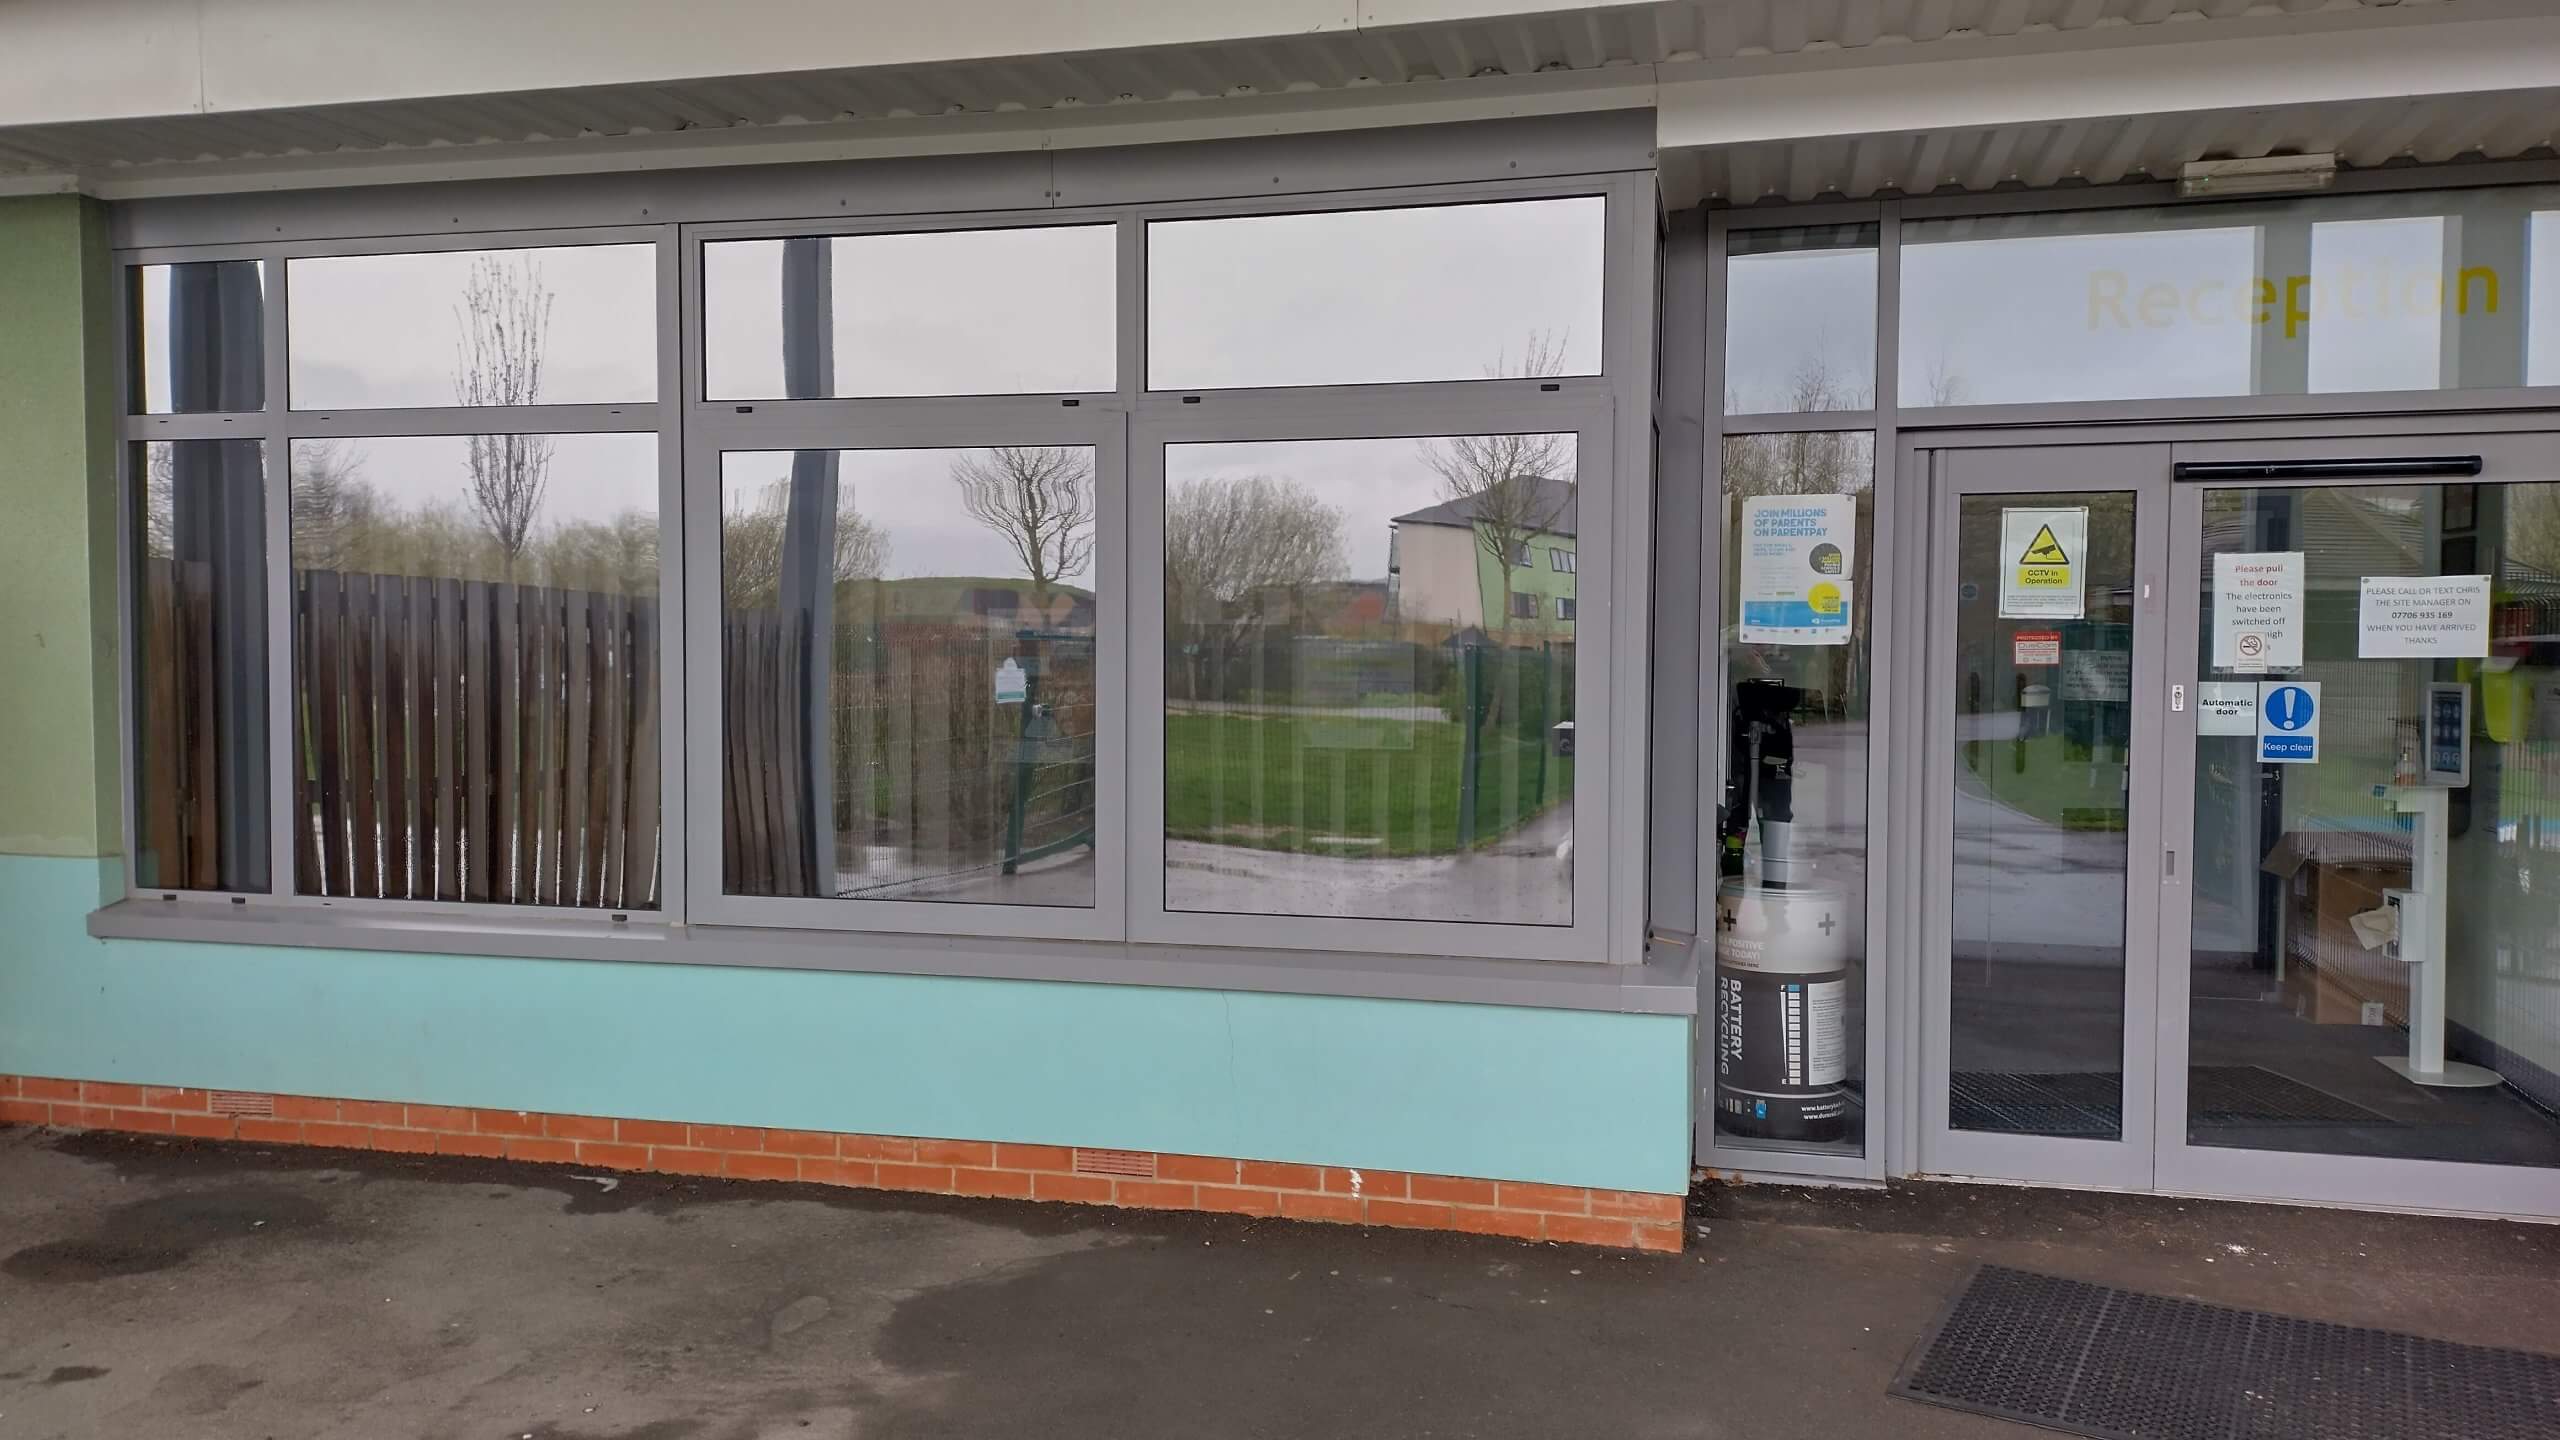 A school in Bridgwater, Somerset. External Grey 20 solar window film applied by Tinting Express, to help control heat and glare in the classrooms along with tidying up the overall look of the building from the playground.